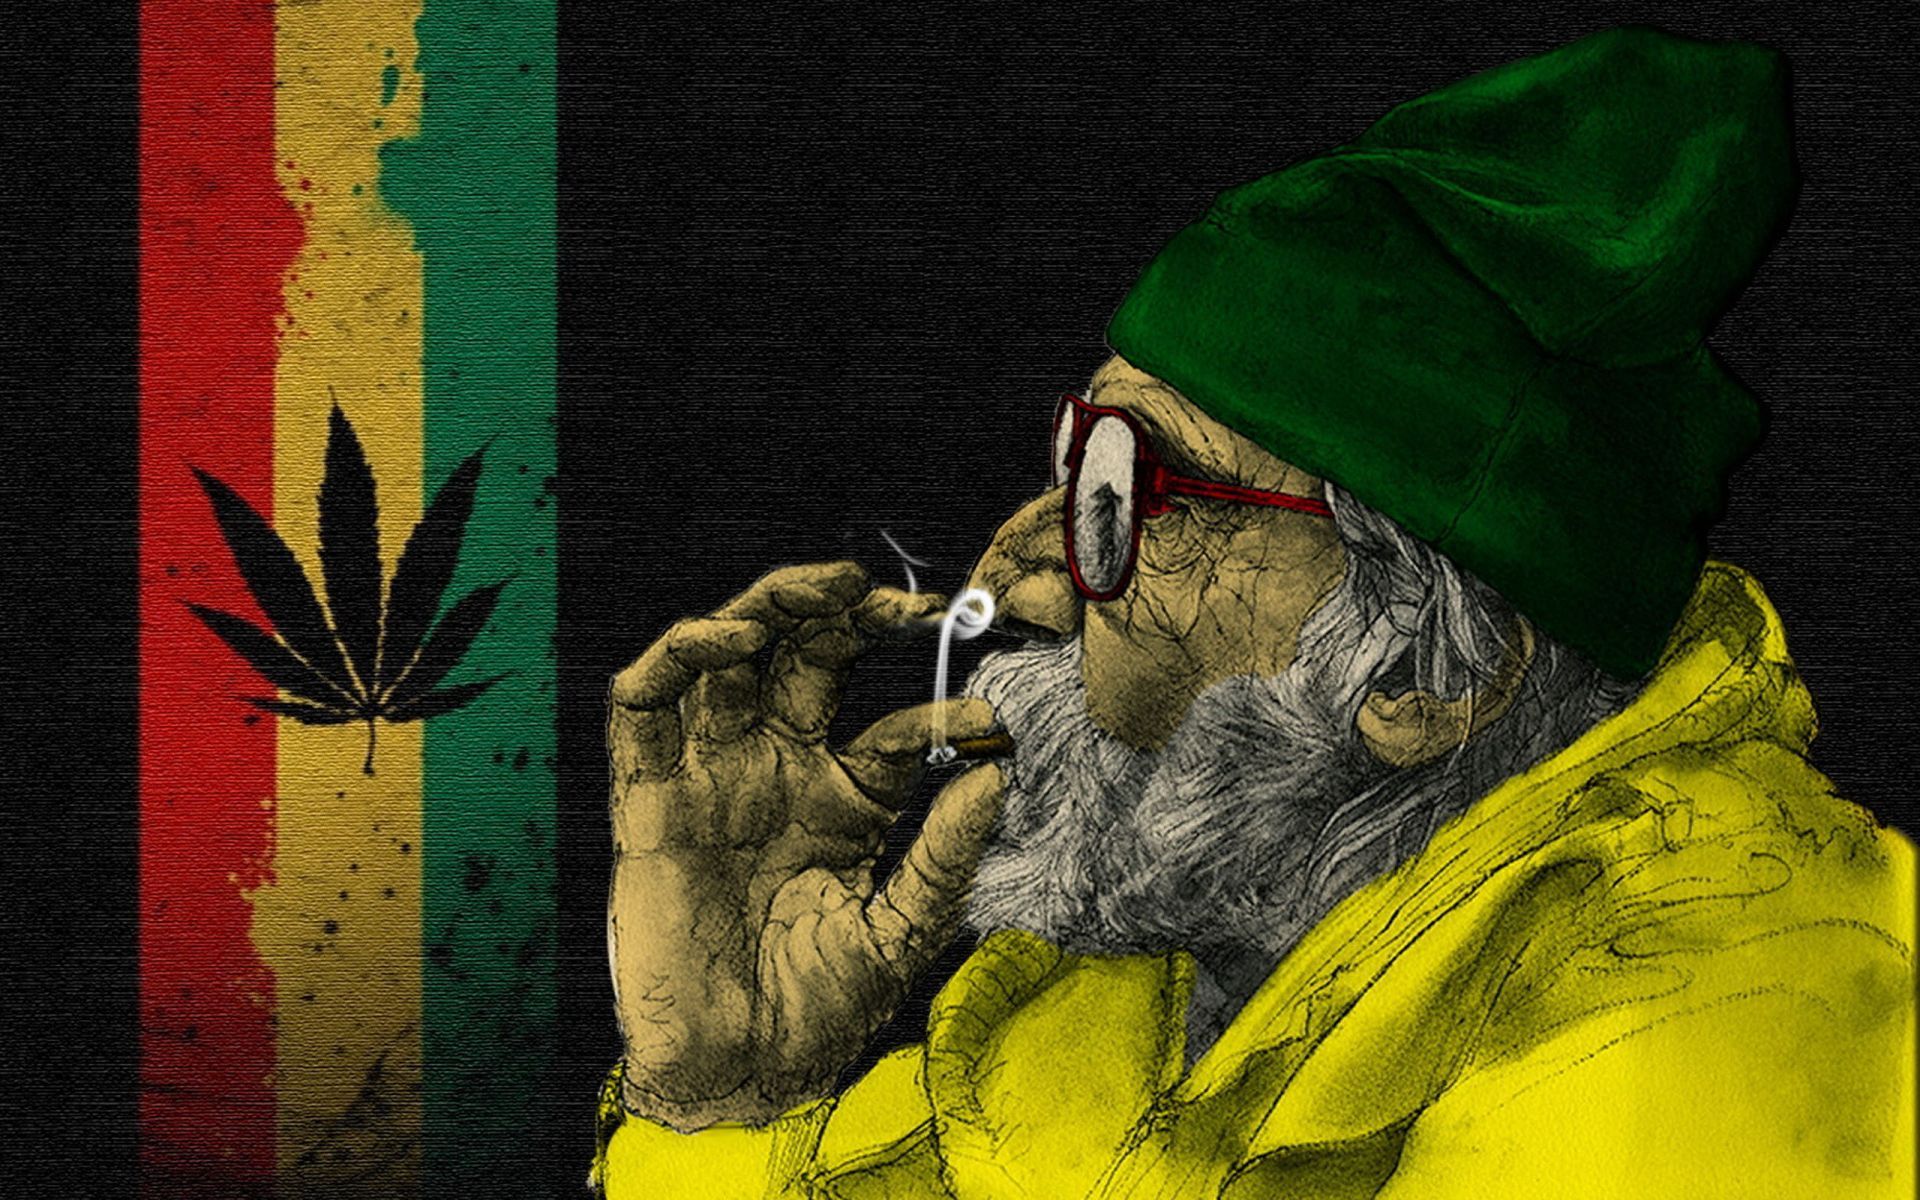 Rasta HD Wallpaper - HD Wallpapers Backgrounds of Your Choice